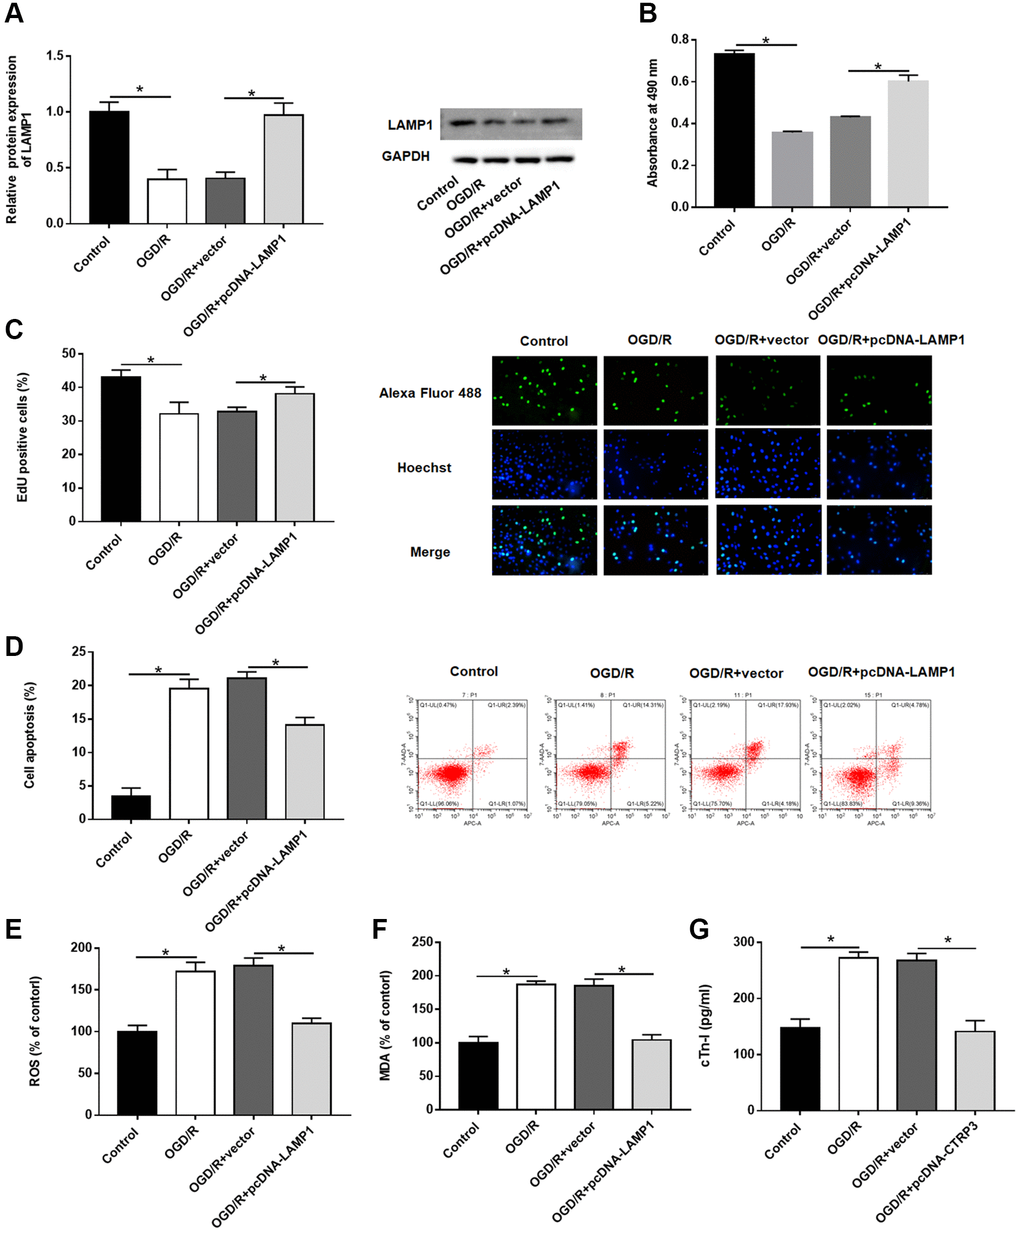 Effect of LAMP1 overexpression on OGD/R injury in H9C2 cells. H9C2 cells were transfected with pcDNA-LAMP1 or negative control (vector) for 24 h and then exposed to OGD/R injury. (A) Relative protein expression of LAMP1was detected by Western blotting. (B, C) Effect of LAMP1 overexpression on cell proliferation was assessed by using CCK-8 and EdU assays. (D) Effect of LAMP1 overexpression on cell apoptosis was detected by flow cytometry. (E–G) Effects of CTRP3 overexpression on ROS, MDA and cTn-I production were determined.